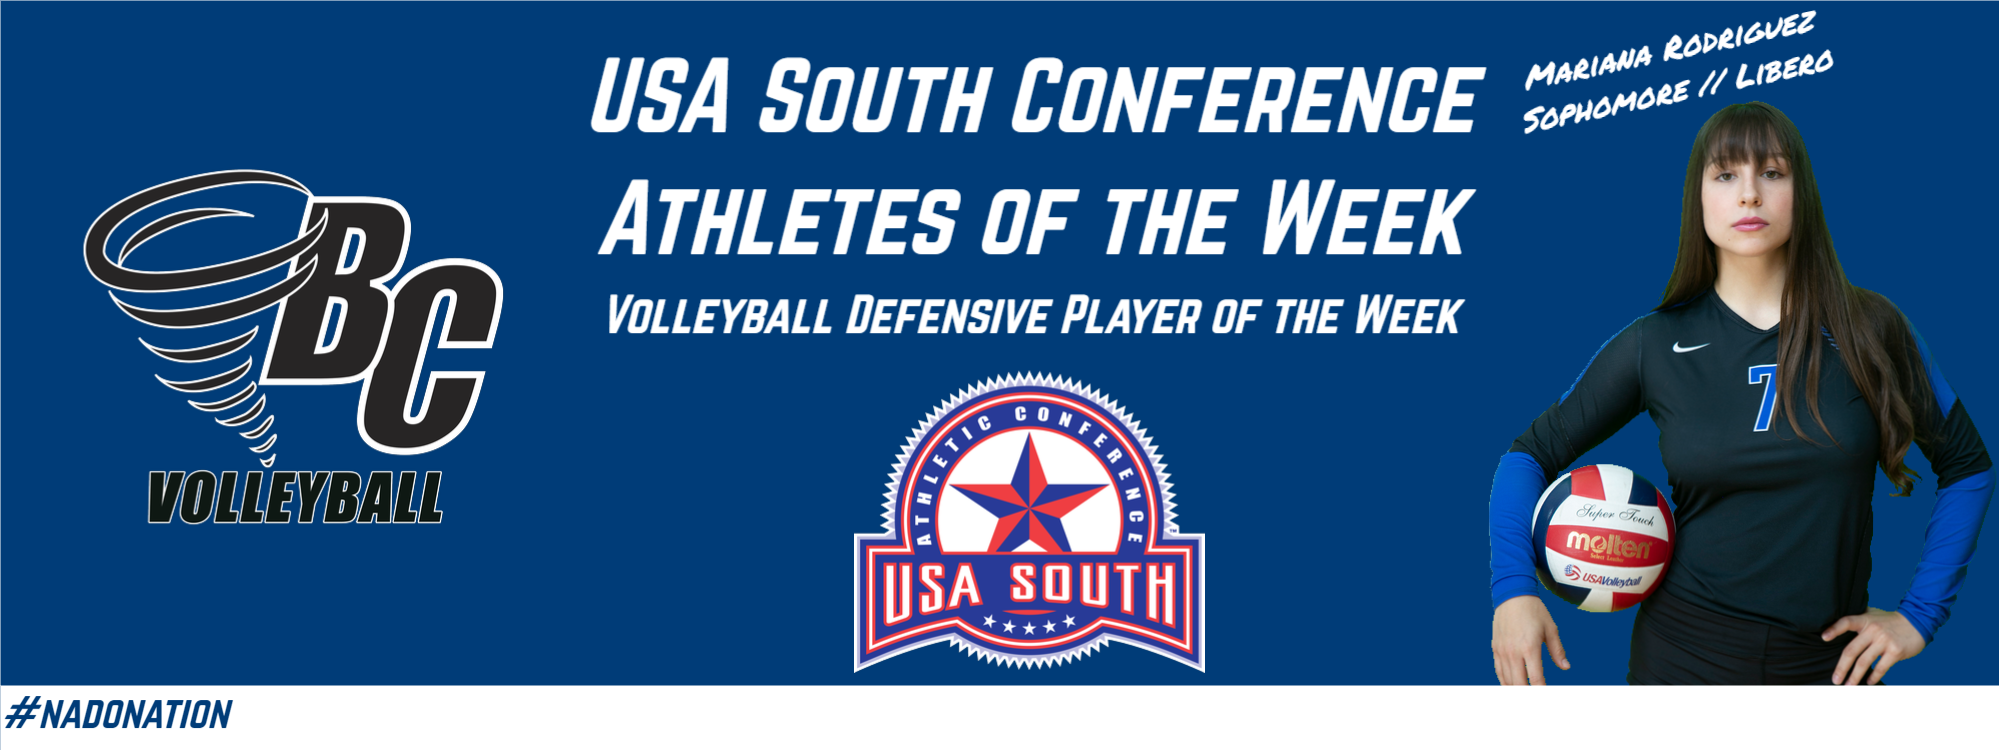 Mariana Rodriguez Claims USA South Conference Volleyball Defensive Player of the Week Honor